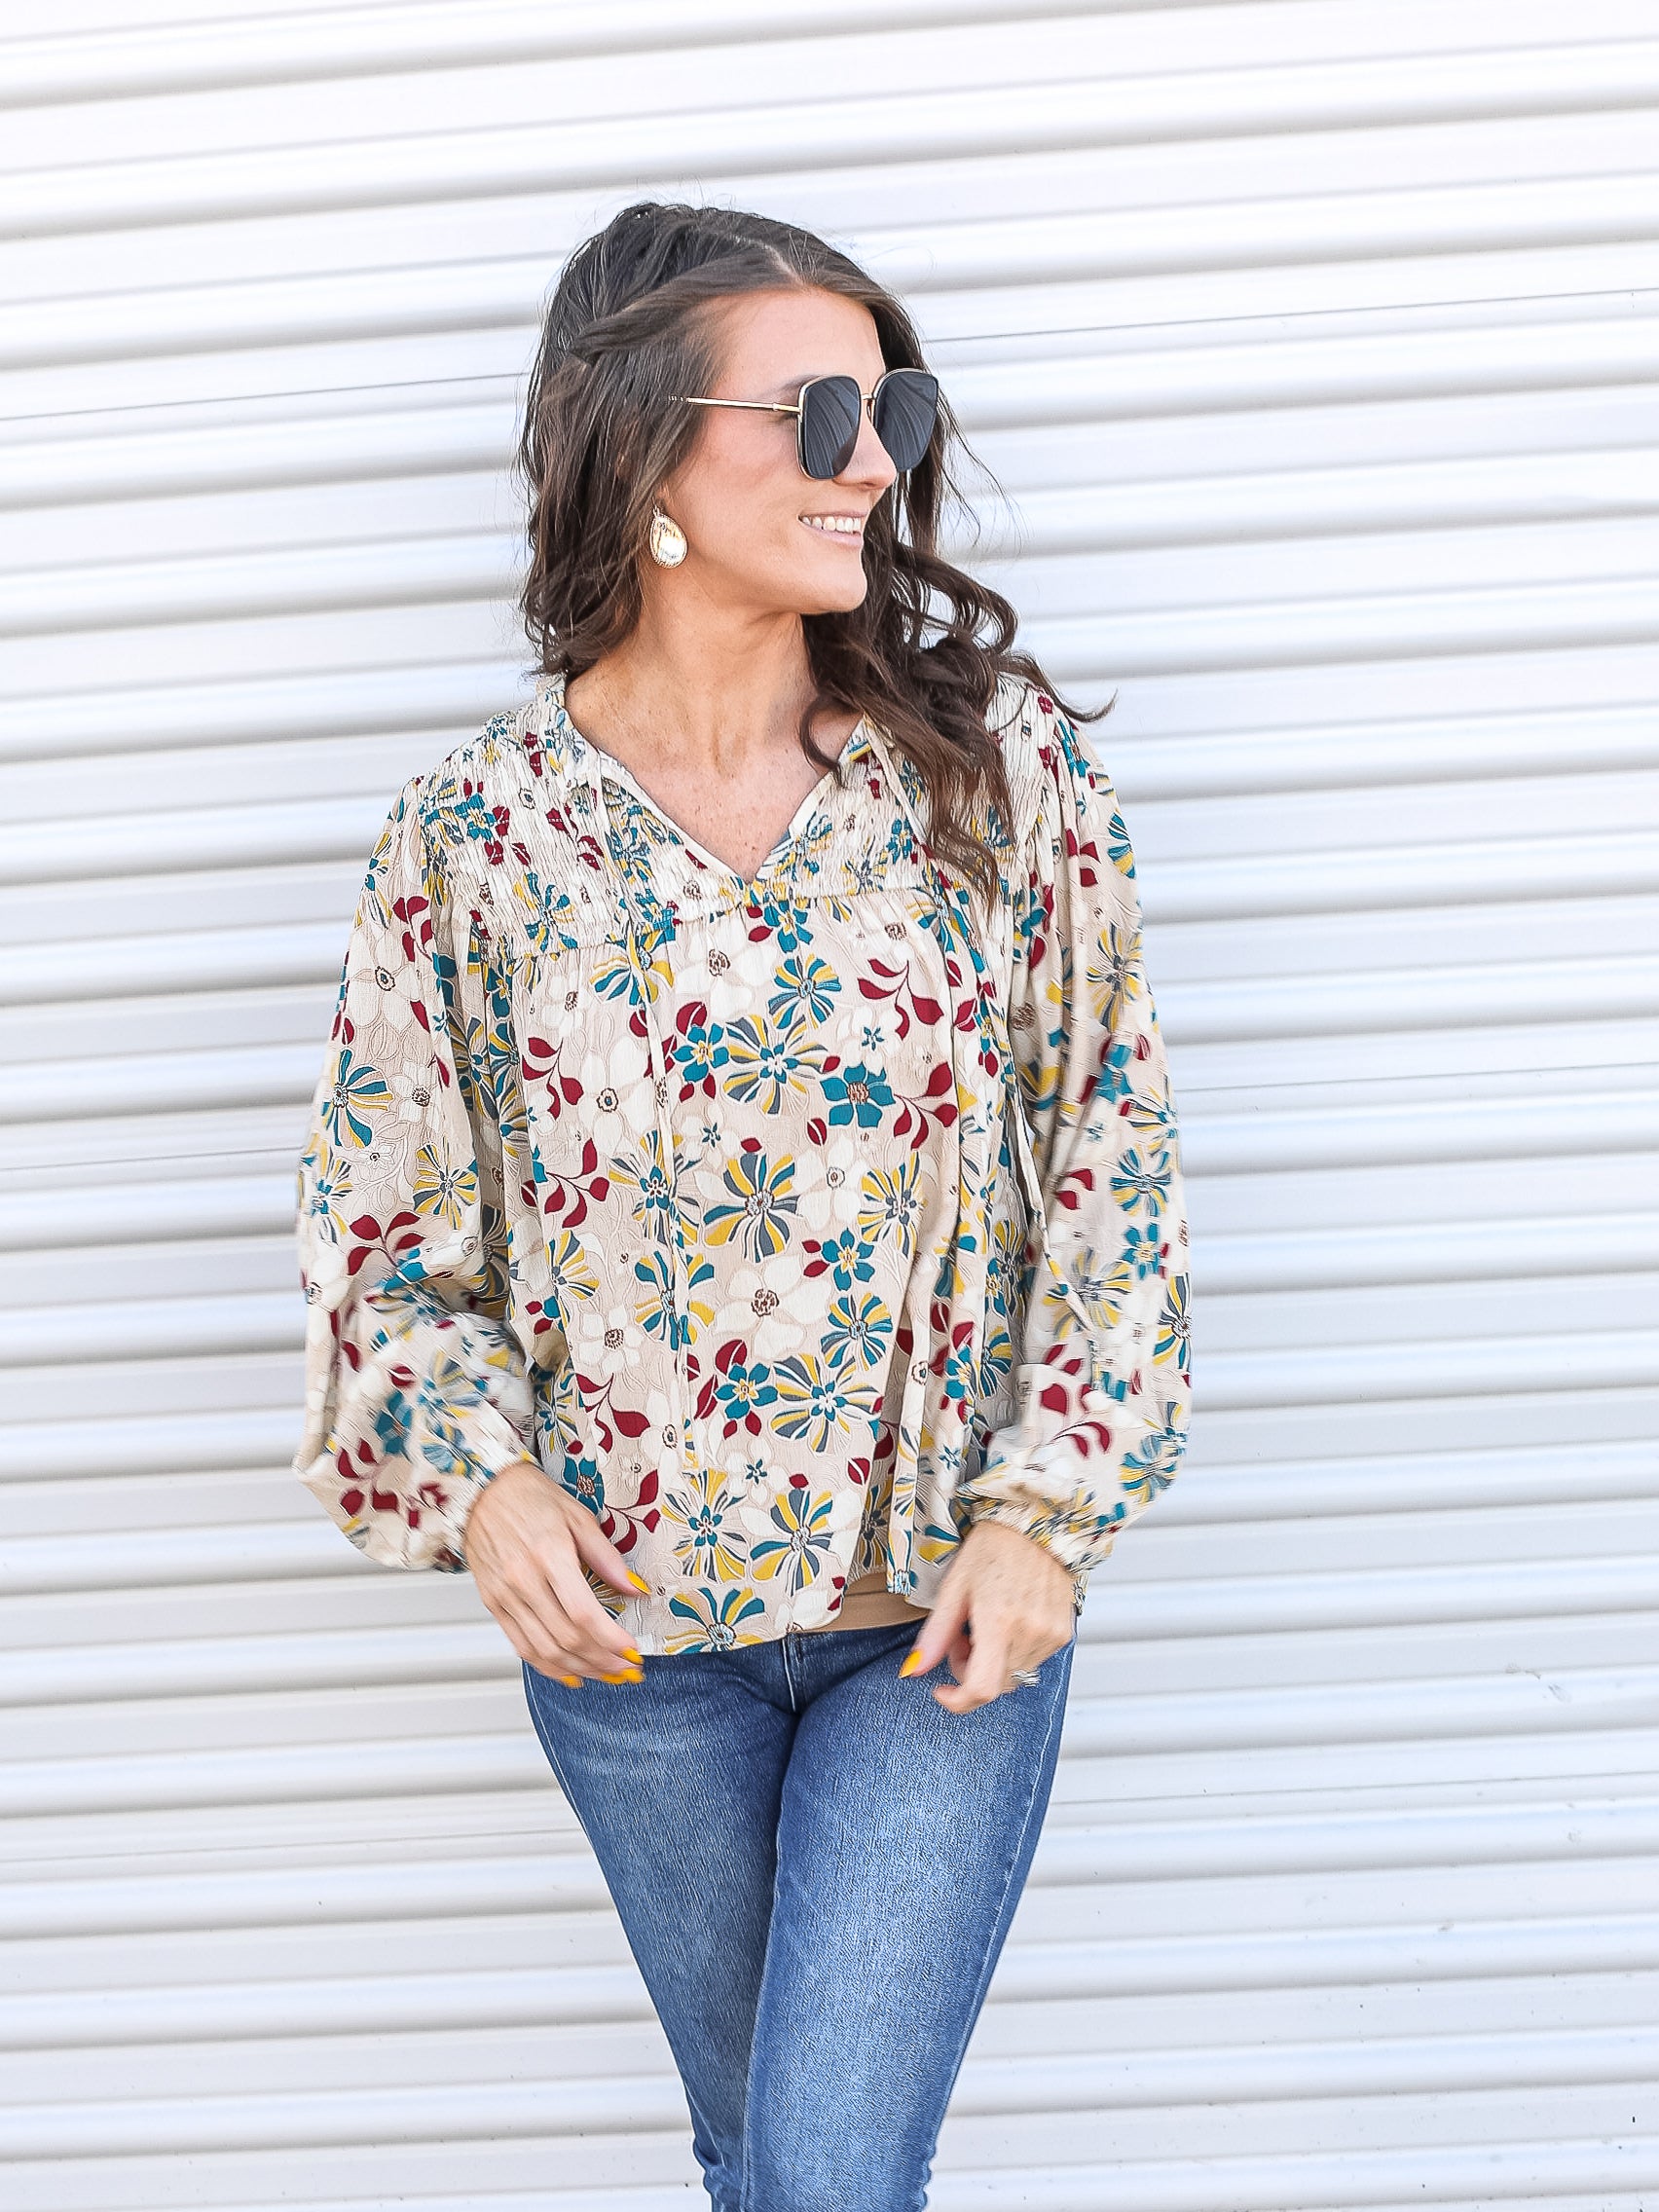 Floral top with 70's vibes paired with jeans